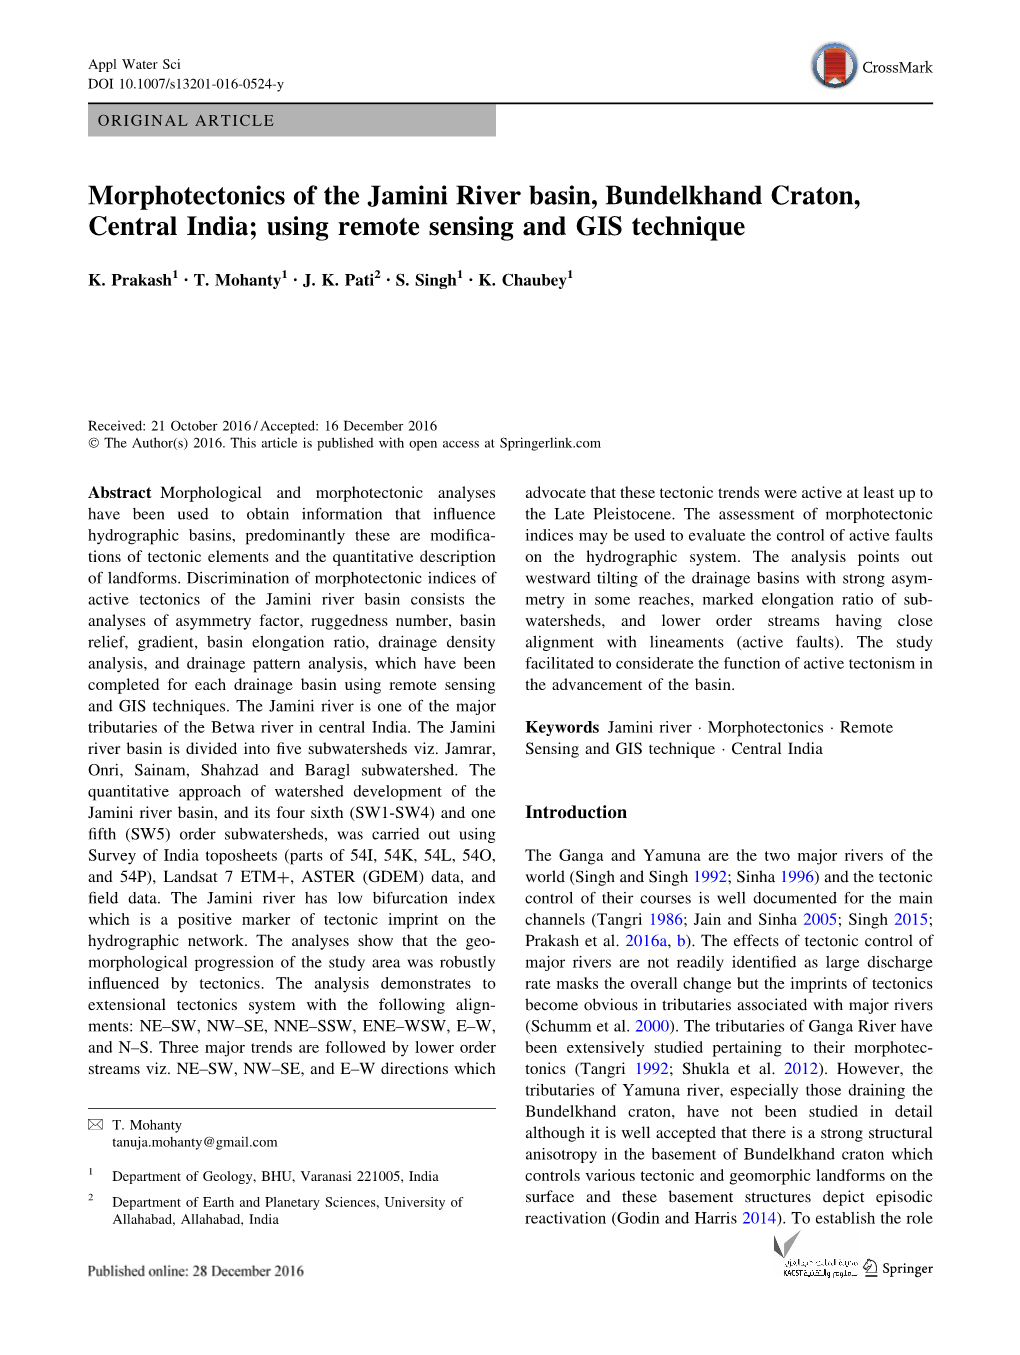 Morphotectonics of the Jamini River Basin, Bundelkhand Craton, Central India; Using Remote Sensing and GIS Technique